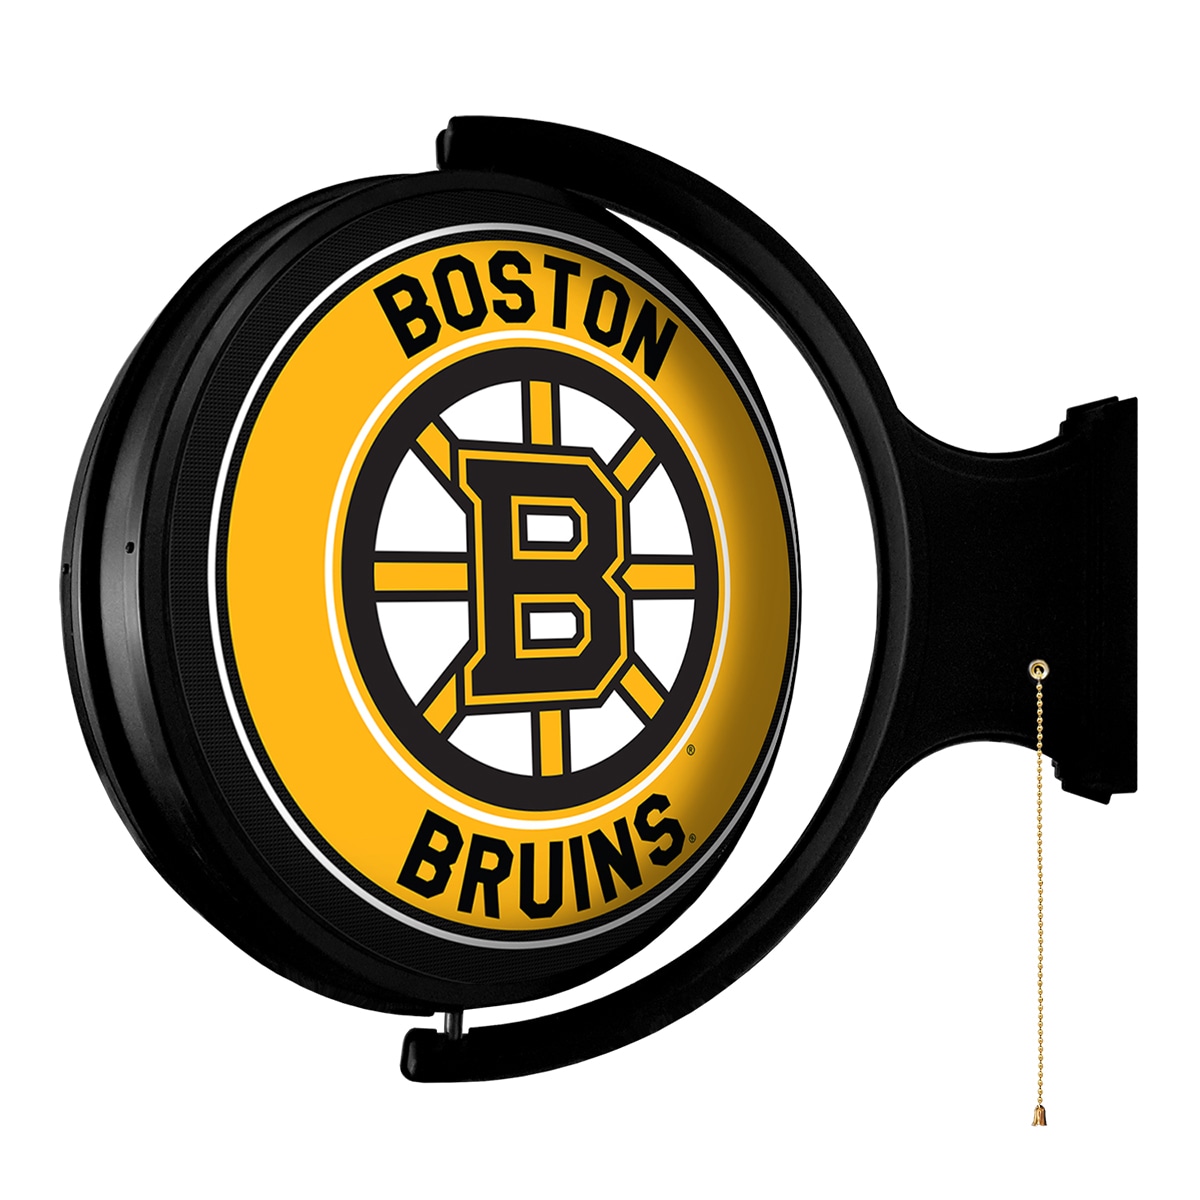 Bruins On The Ropes After Blues Steal Game 5 At TD Garden